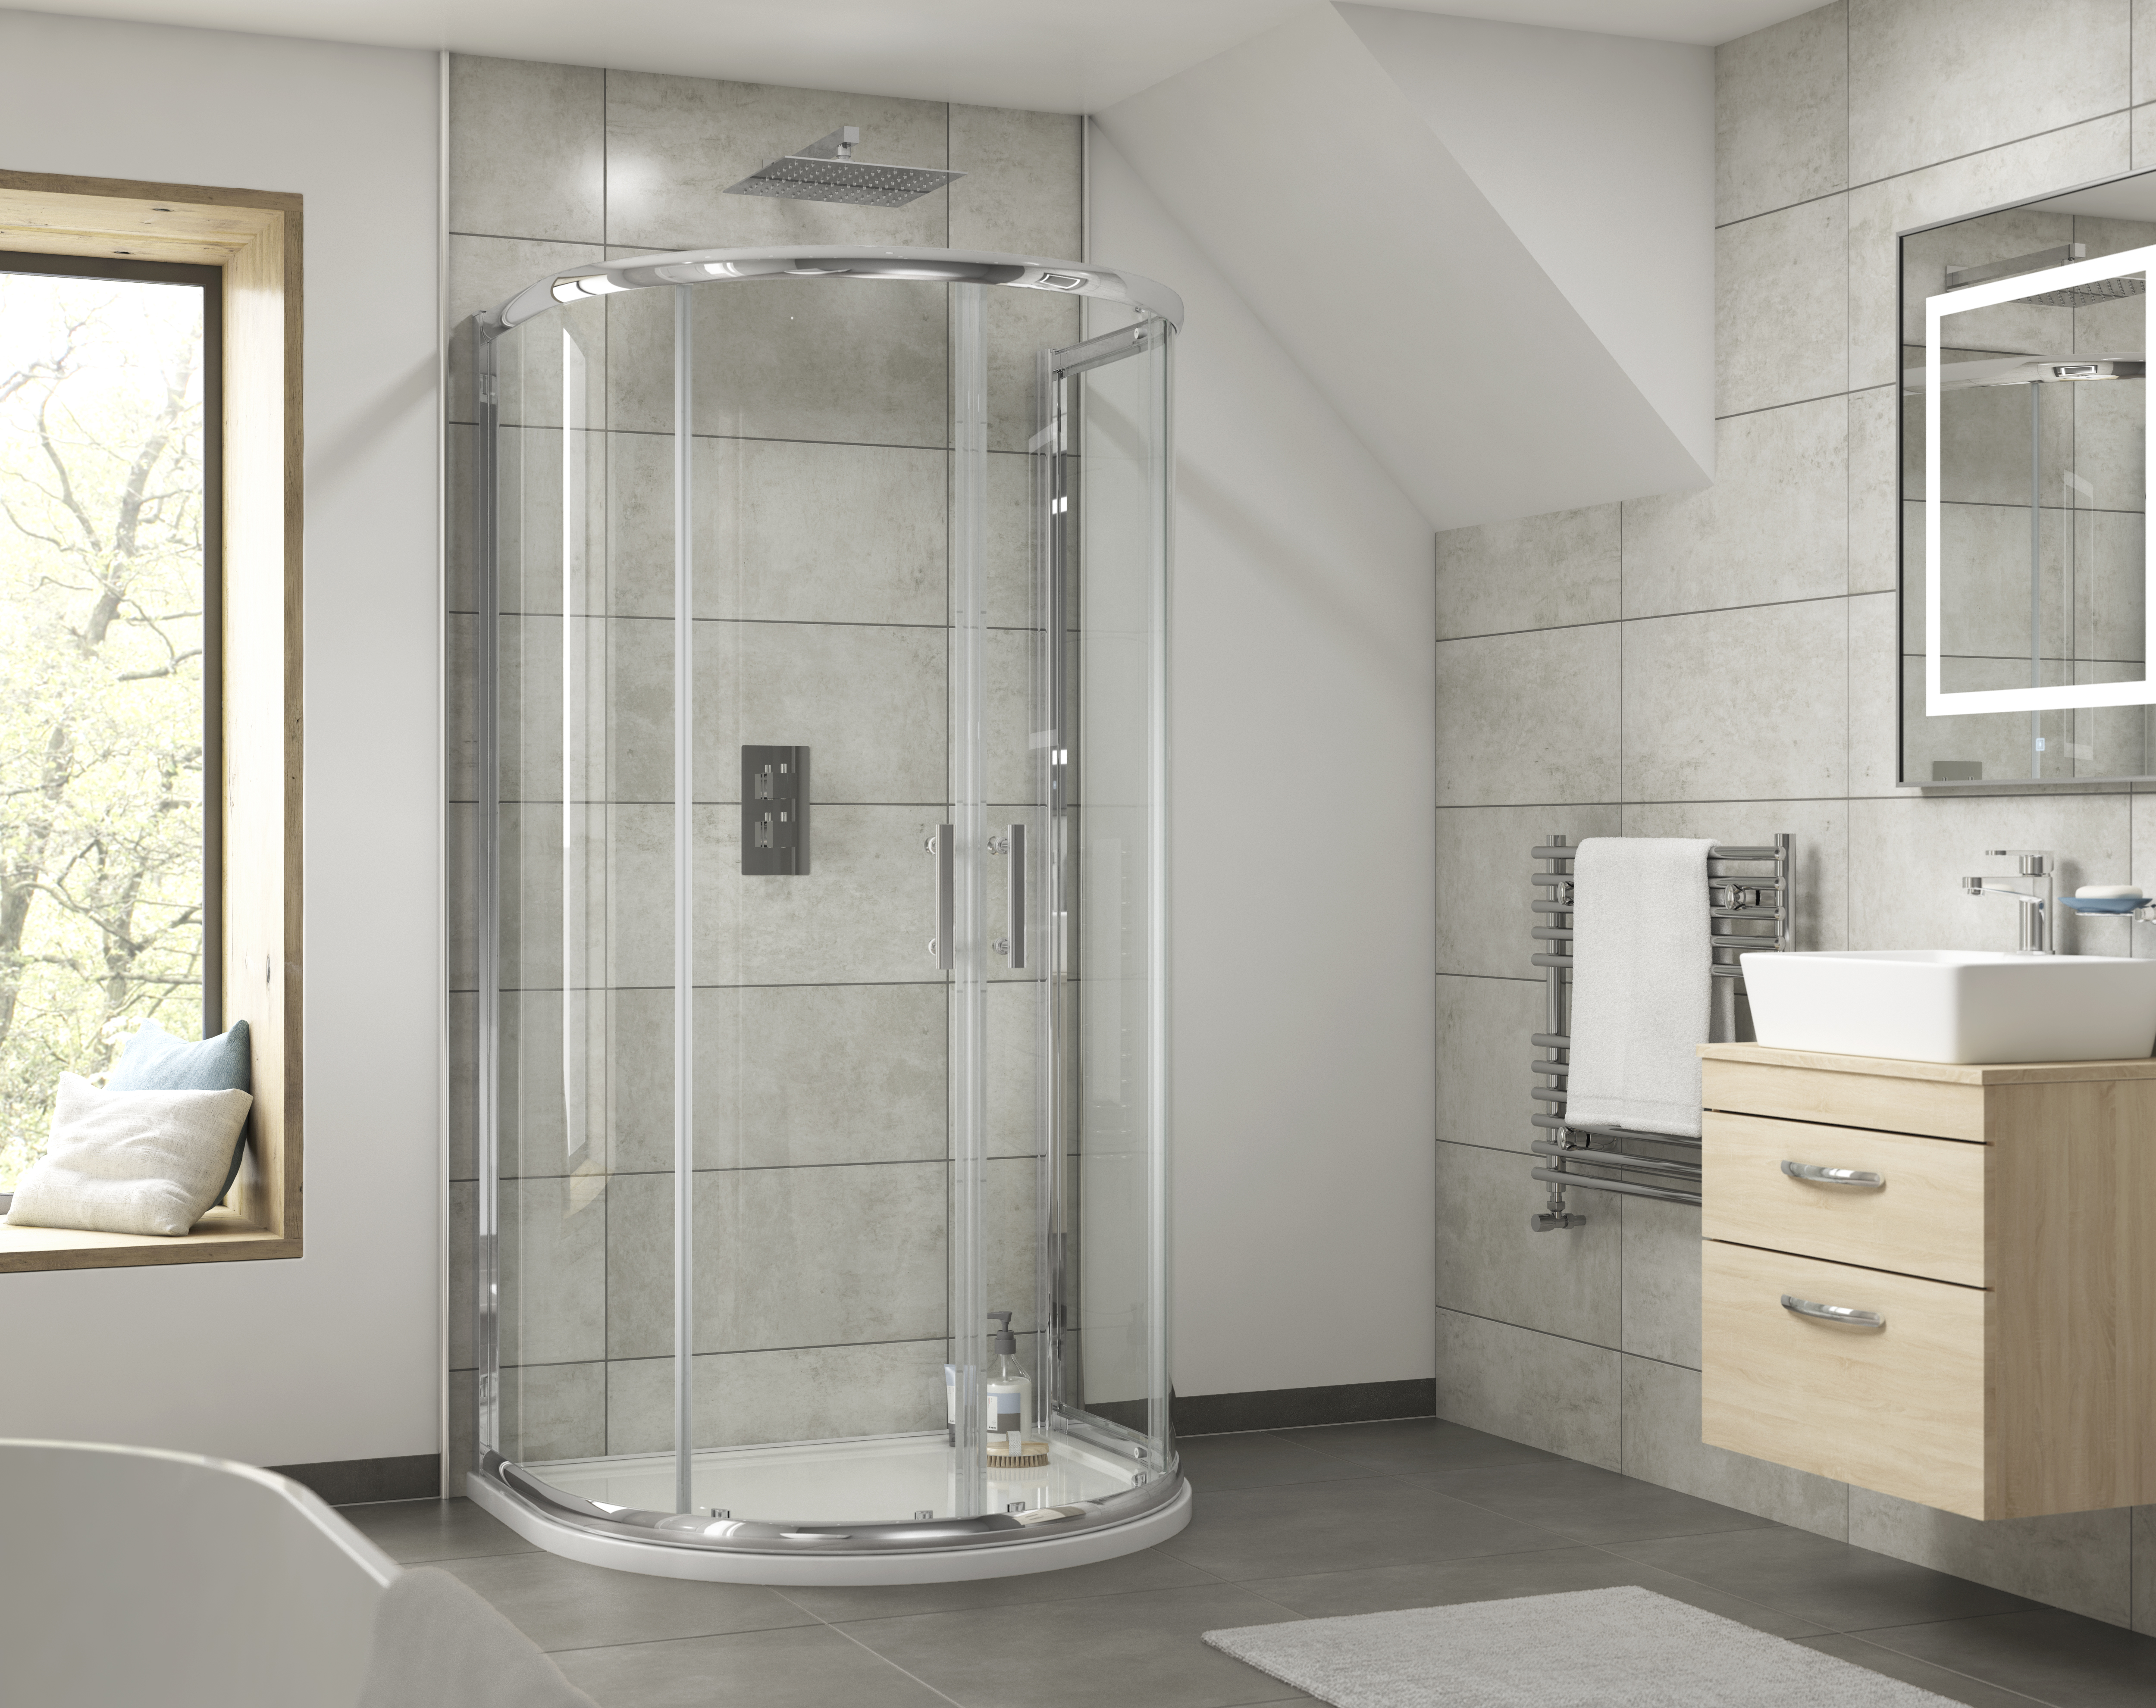 Lifestyle image of a D shaped shower enclosure